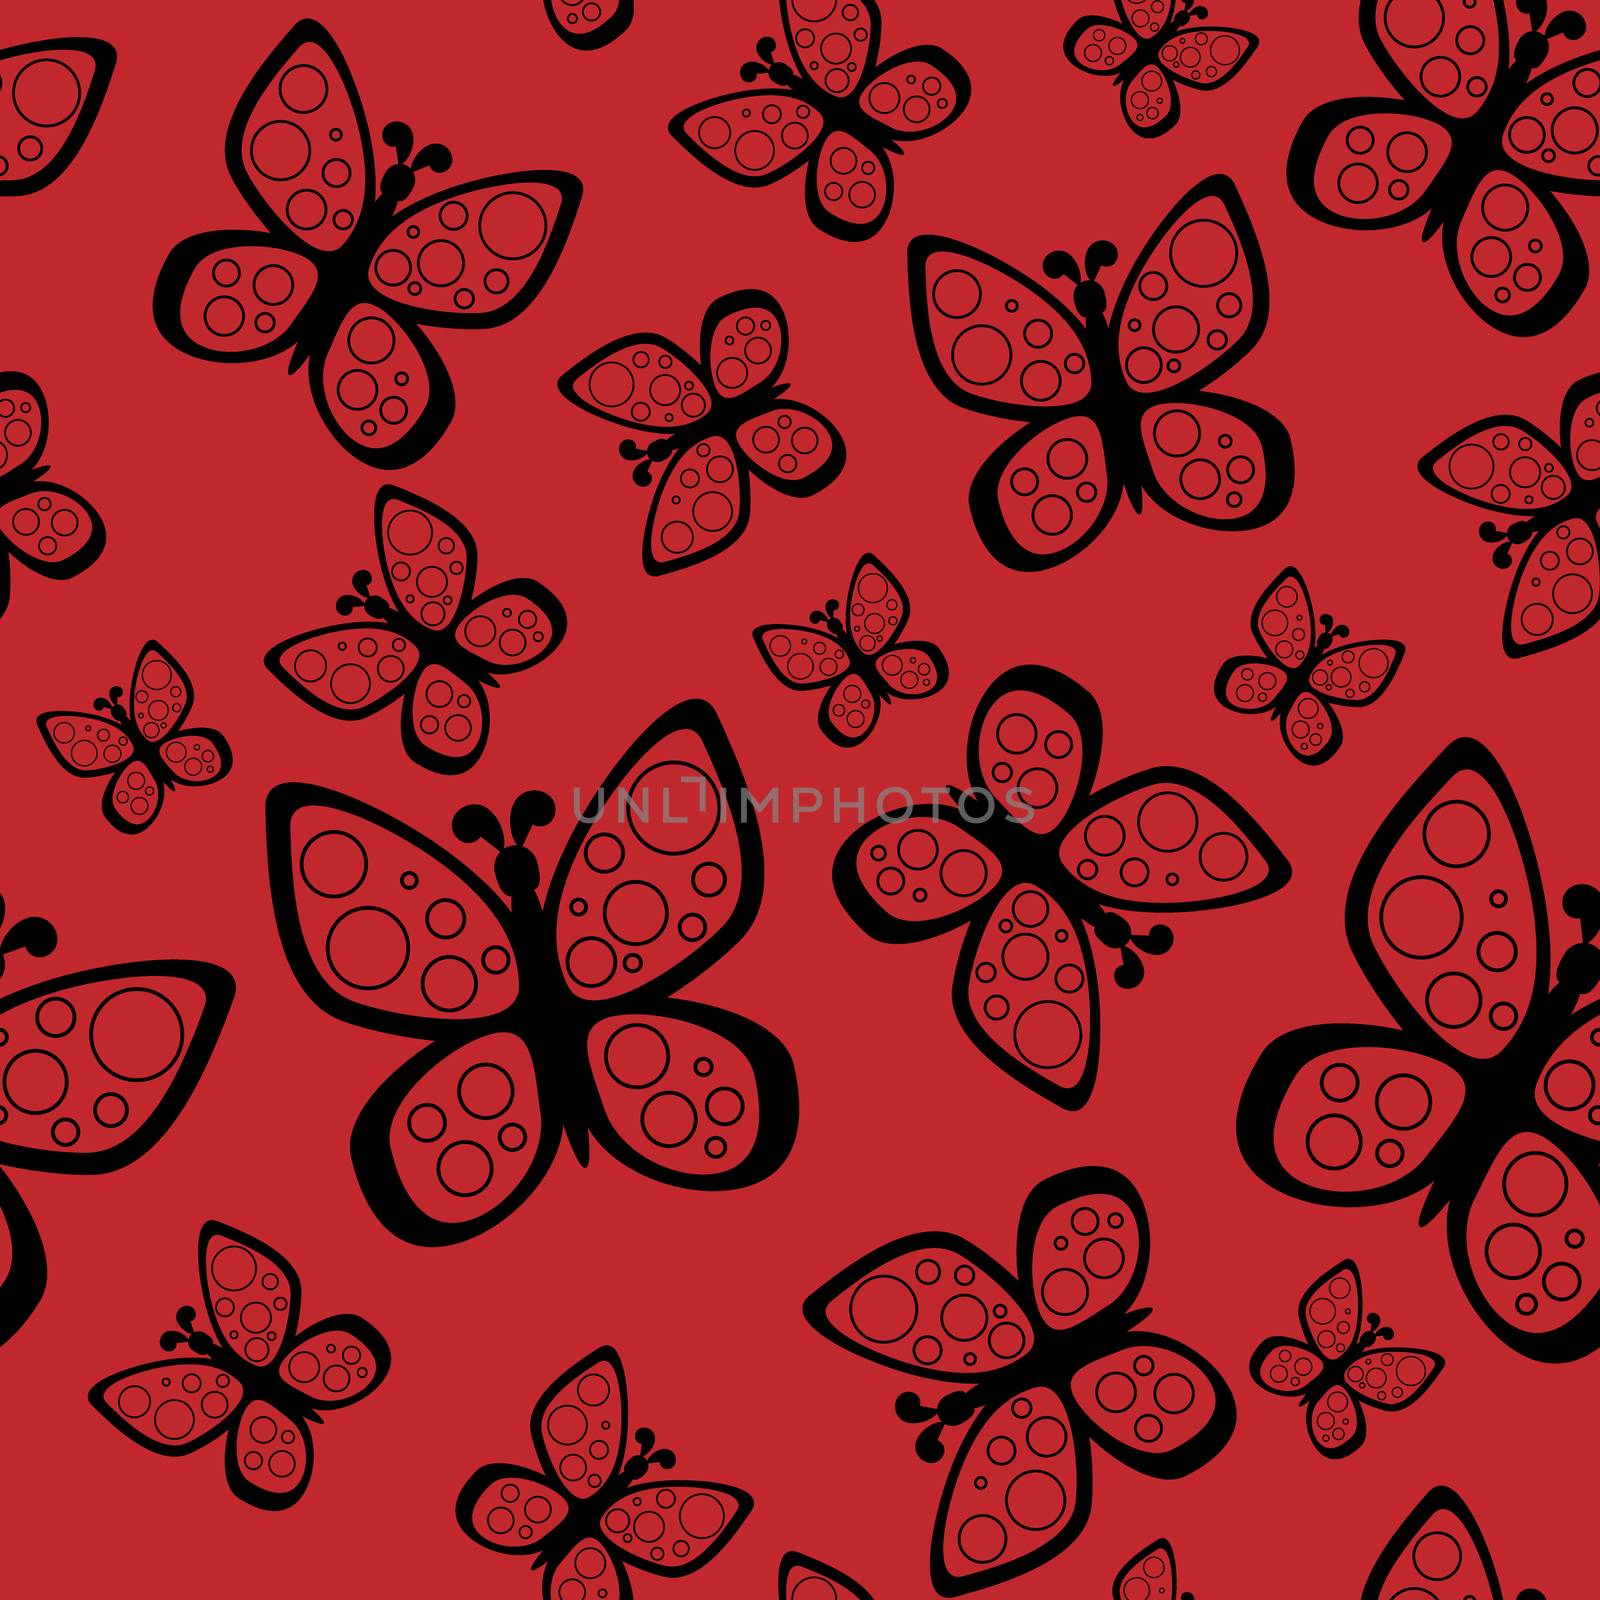 Beautiful summer seamless background with butterflies red and white colors.